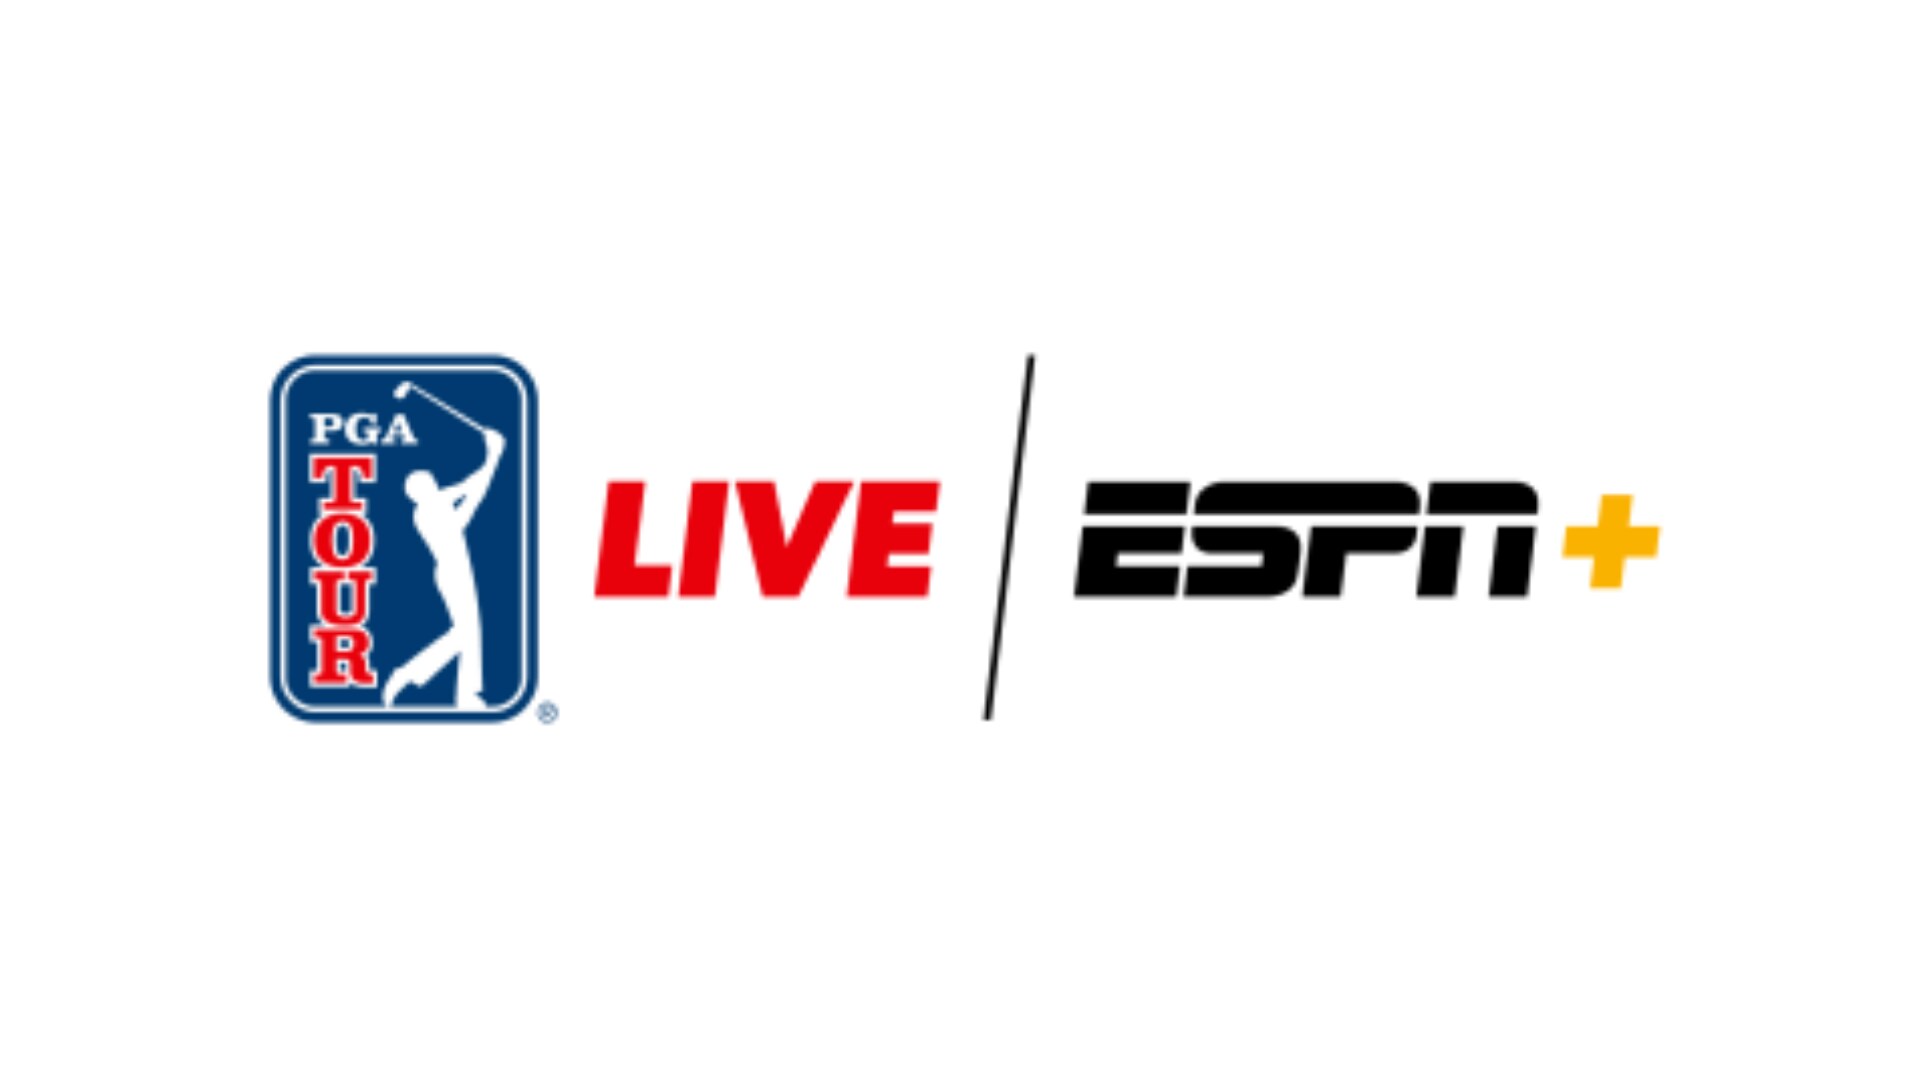 Exclusively on ESPN+ Thursday through Sunday:  PGA TOUR LIVE to Stream Four Concurrent, Live Feeds Featuring Top Players at AT&T Pebble Beach Pro-Am